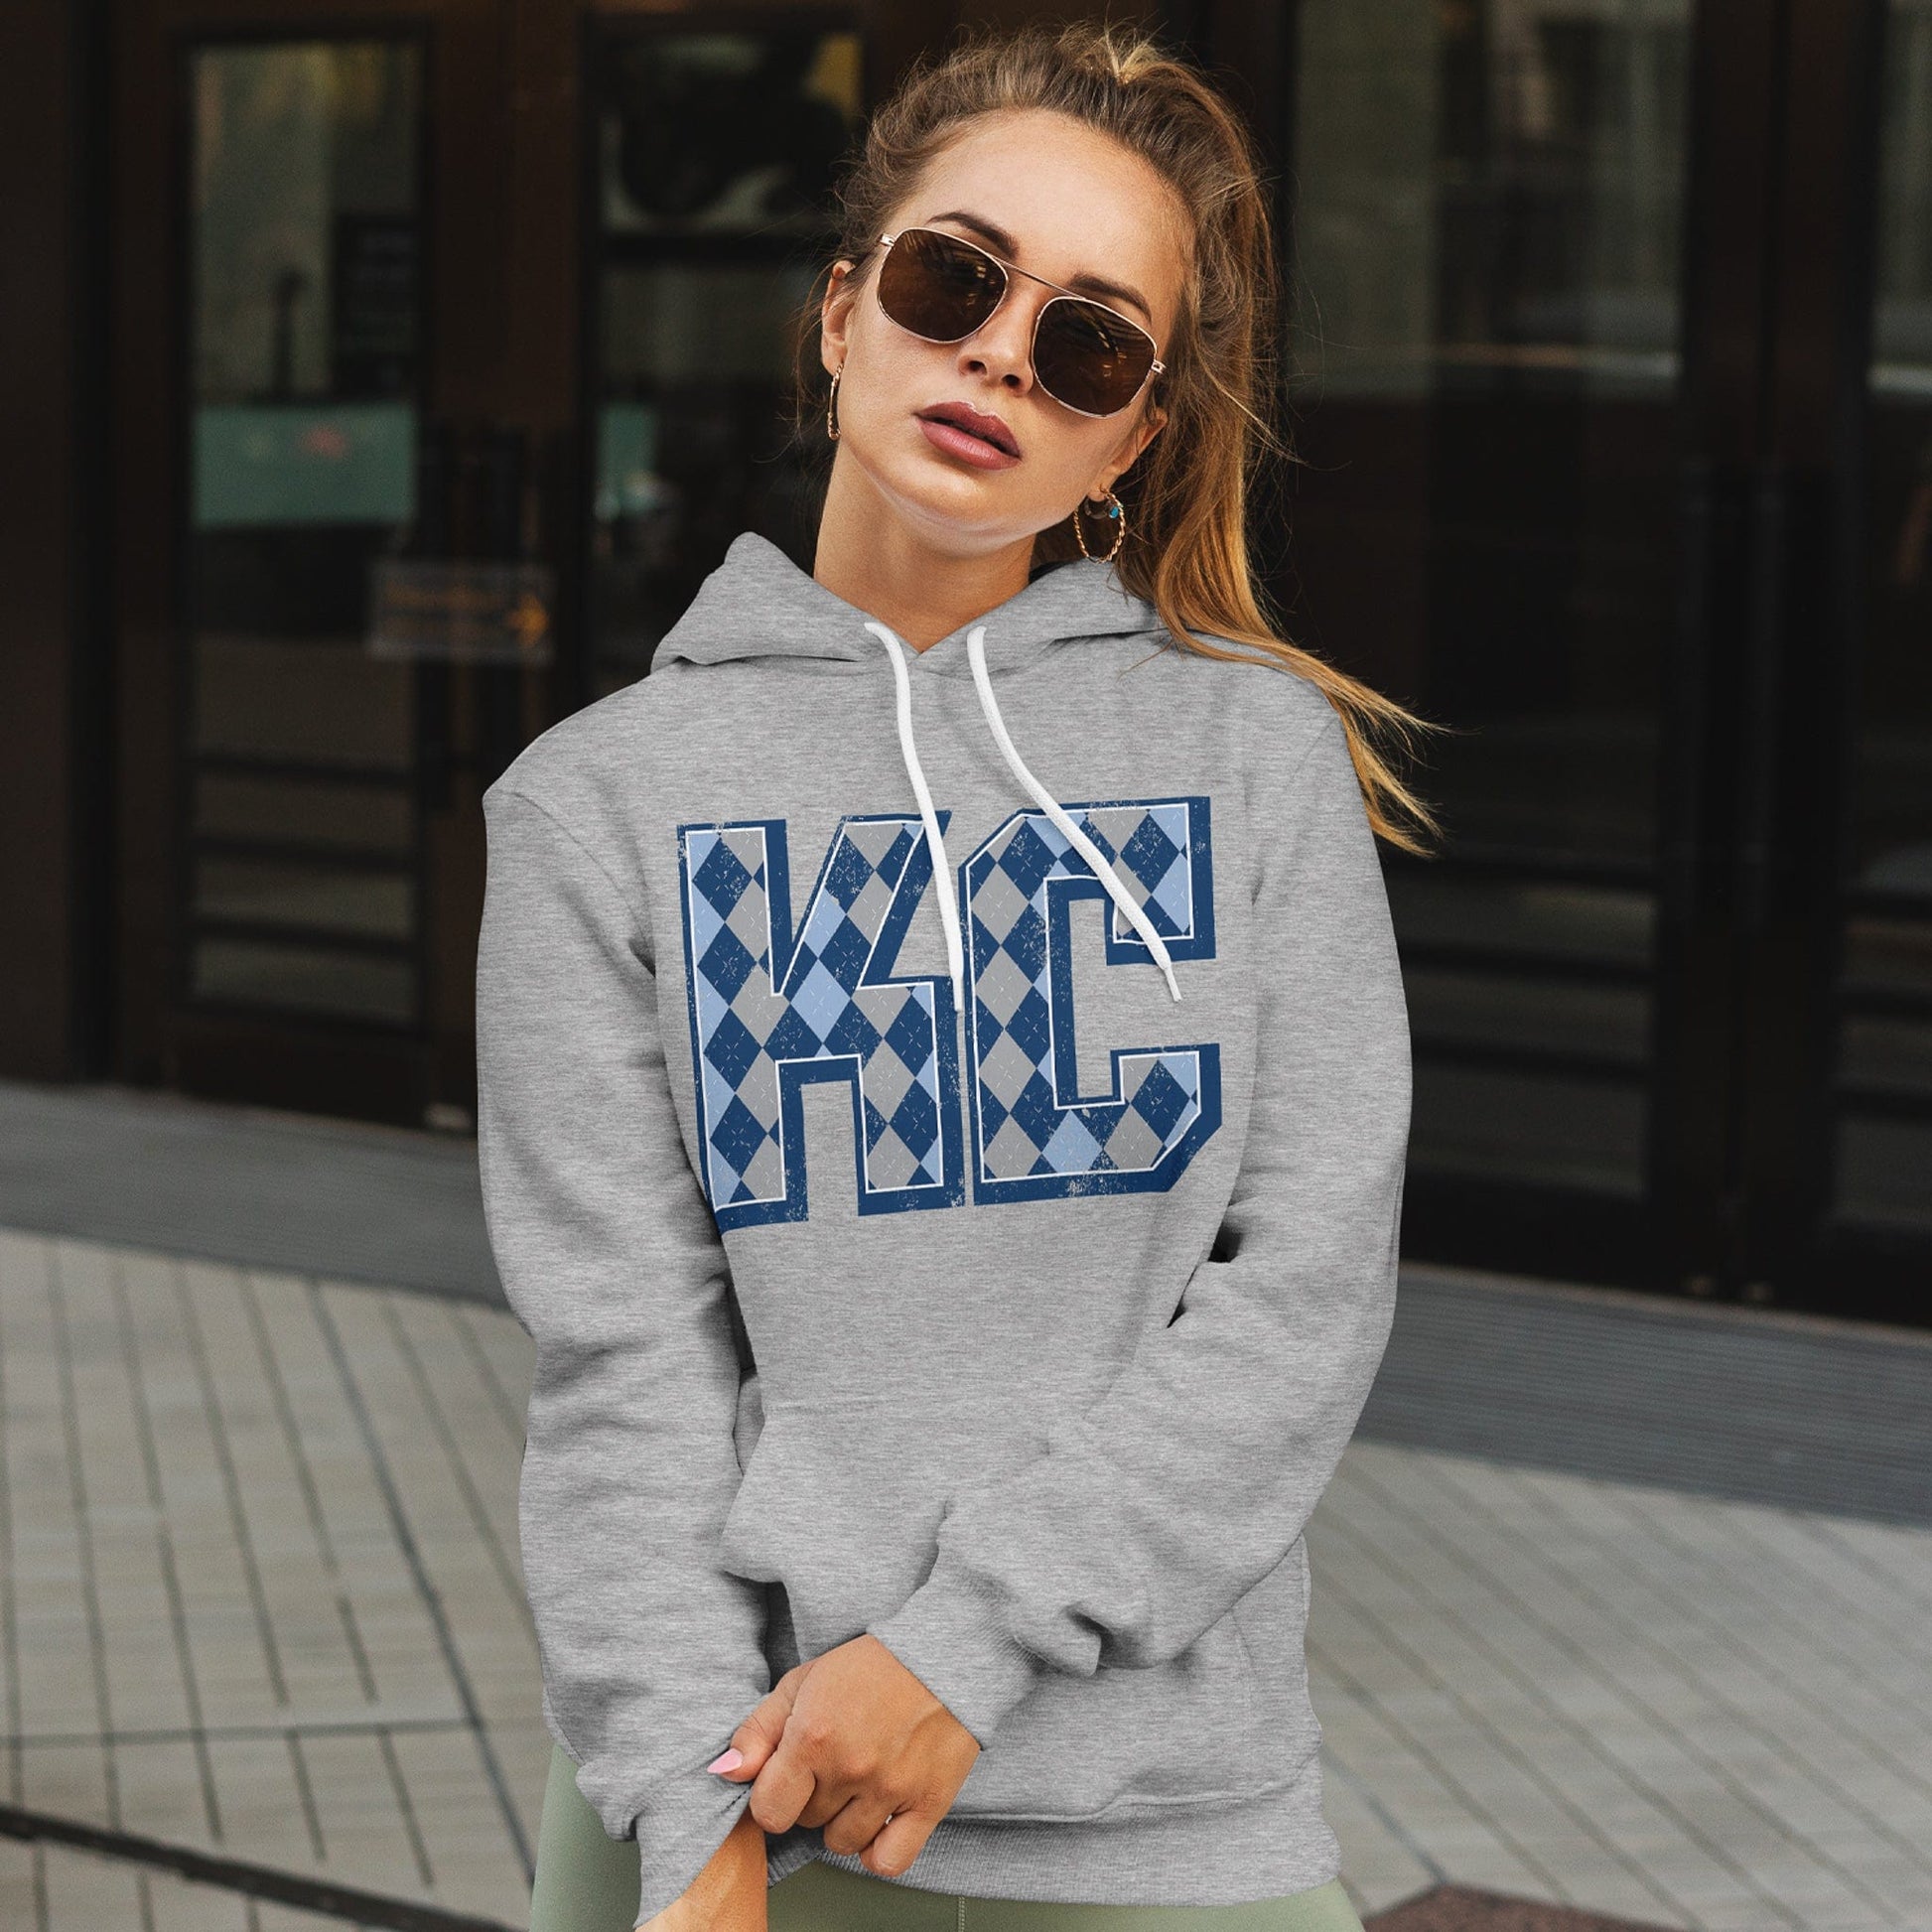 KC Swag Sporting Kansas City powder blue/navy/grey/white ARGYLE pattern KC on athletic heather grey fleece pull-over hoodie worn by female model outside of department store doors